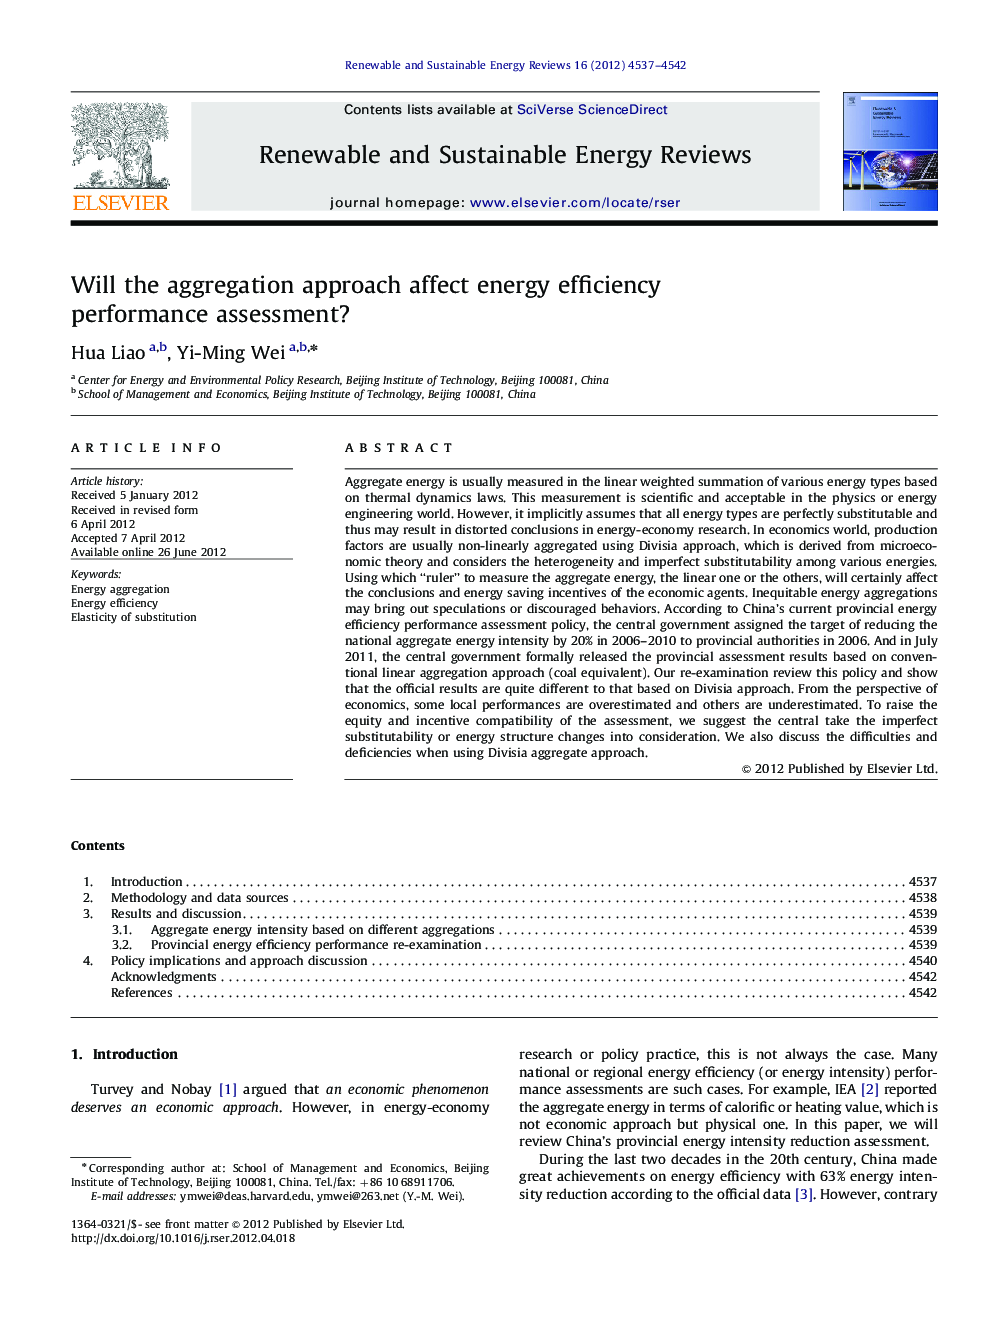 Will the aggregation approach affect energy efficiency performance assessment?